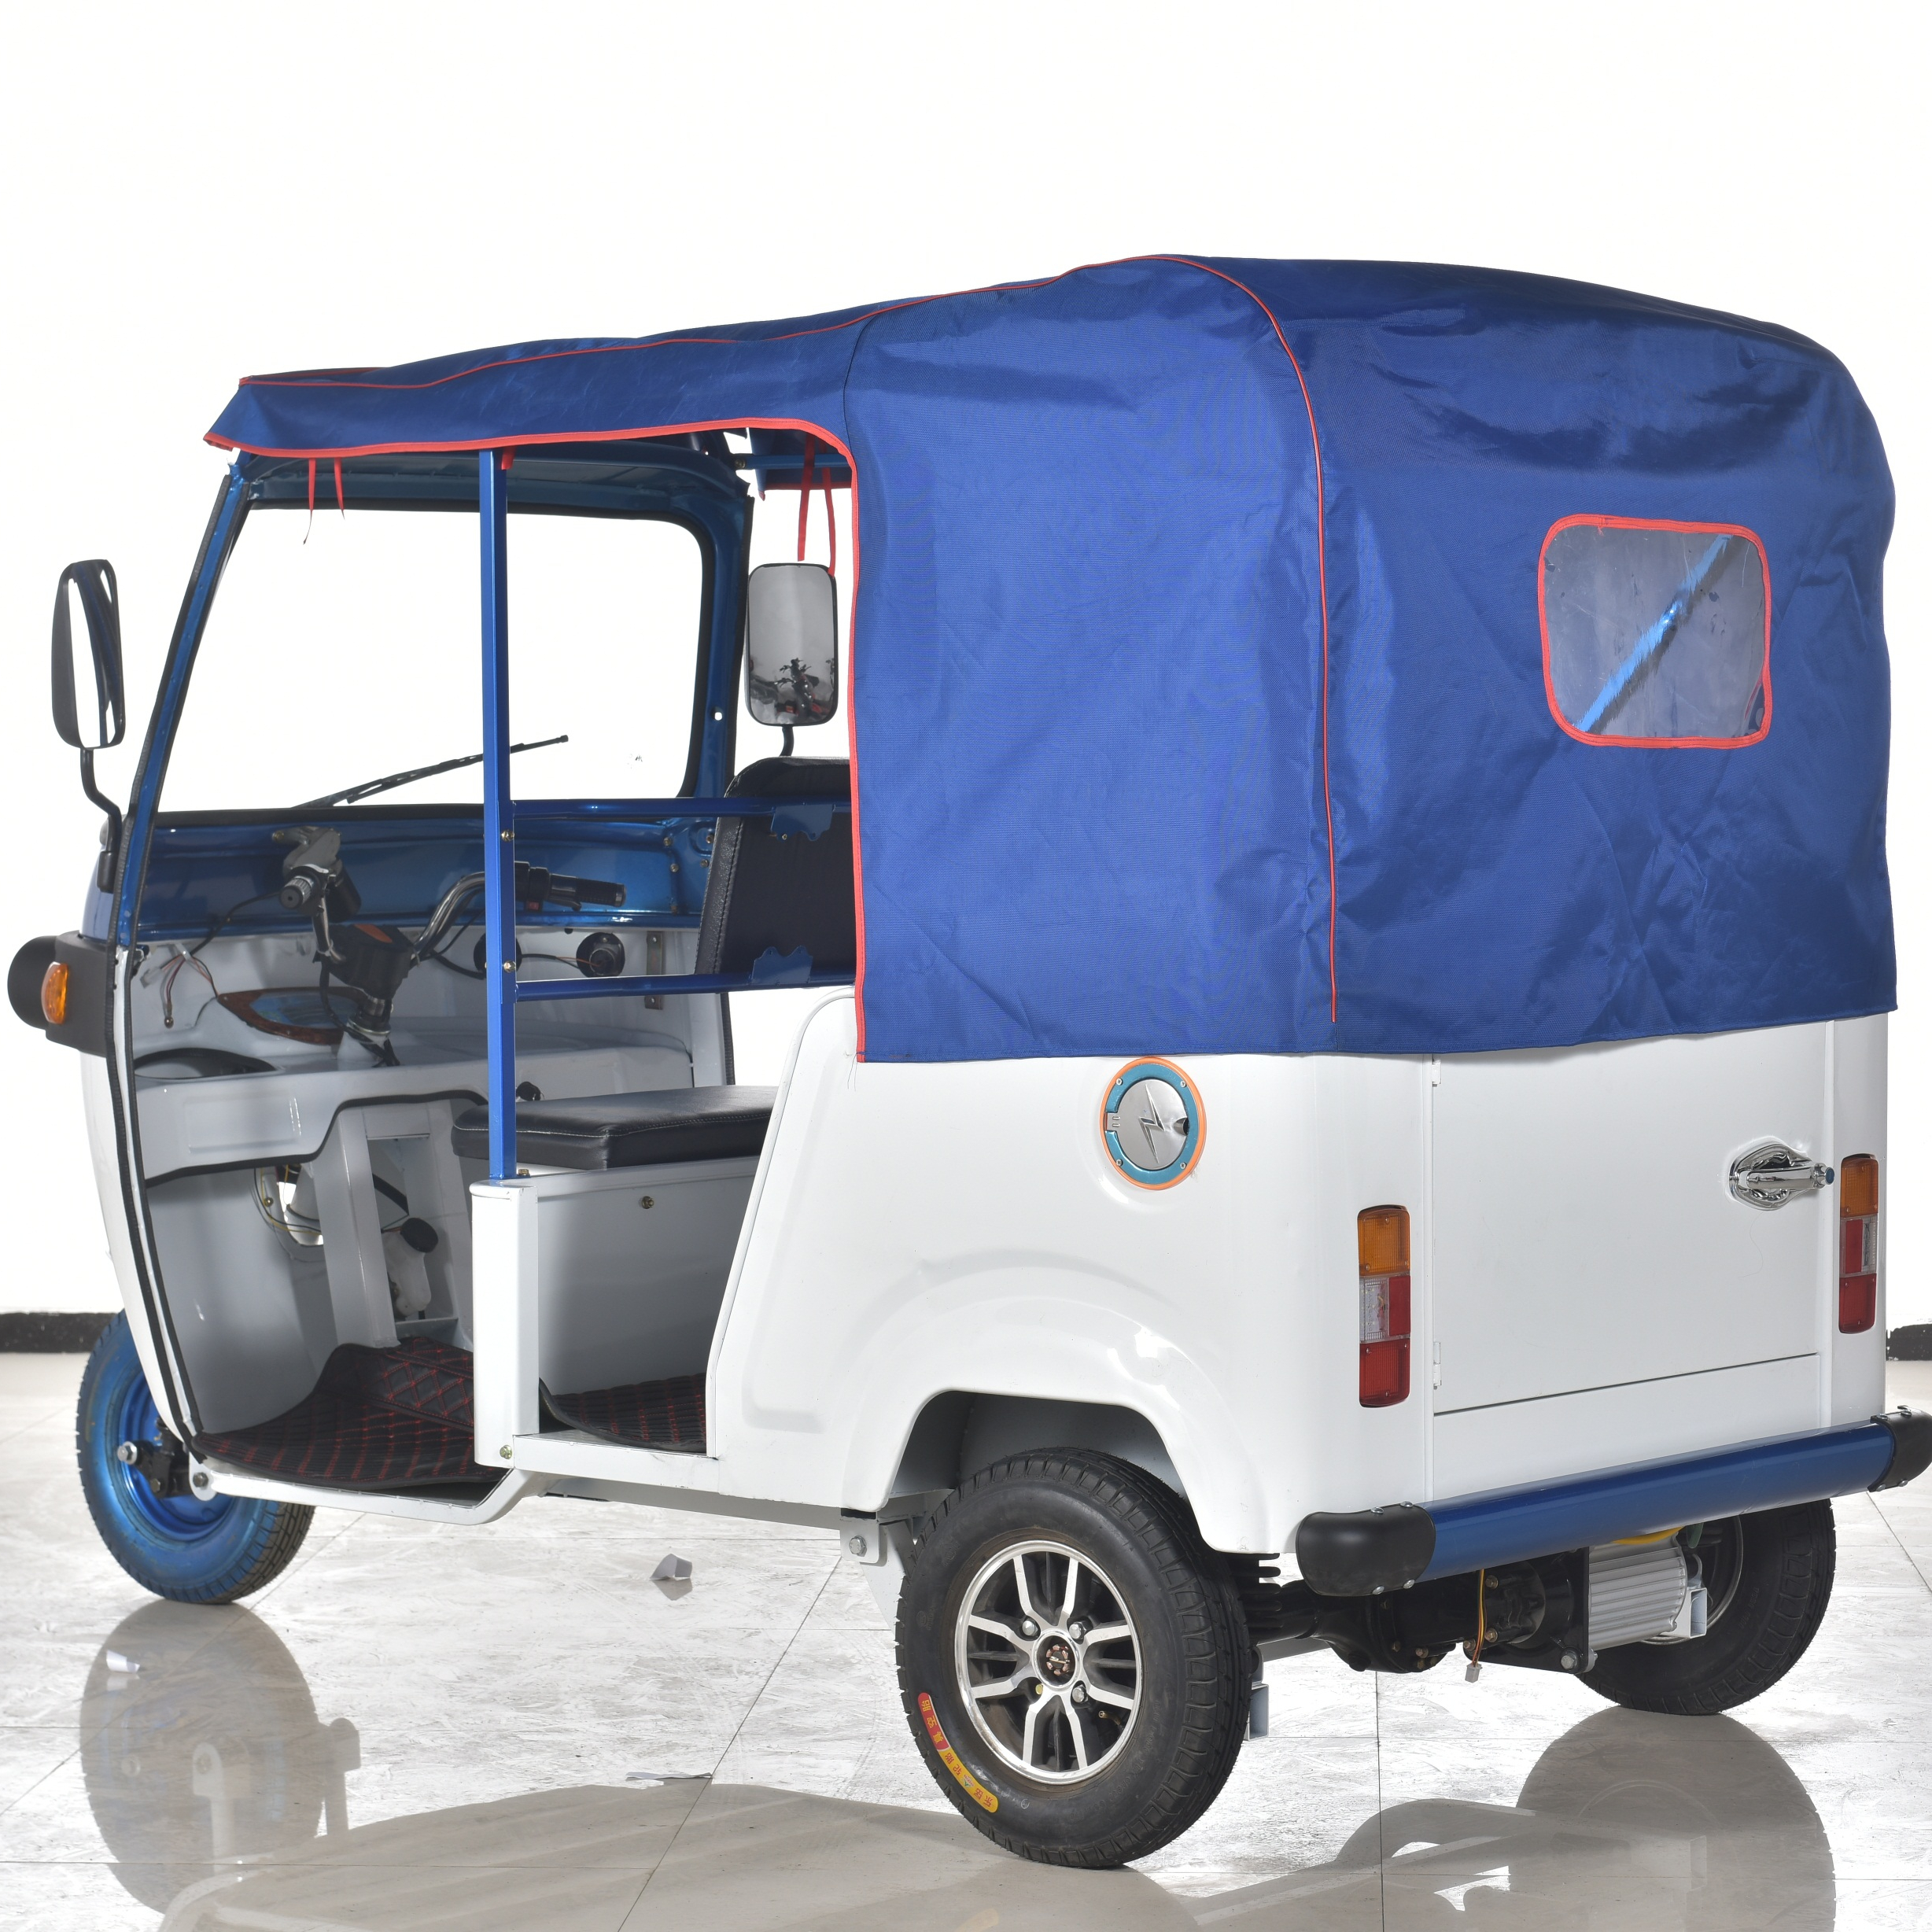 China Wholesale Tuk-Tuks Wholesalers Suppliers - 2020  Spacious  Electric Tricycle  For Passenger  Cheaper Auto E  Rickshaw Price for sale – Qiangsheng